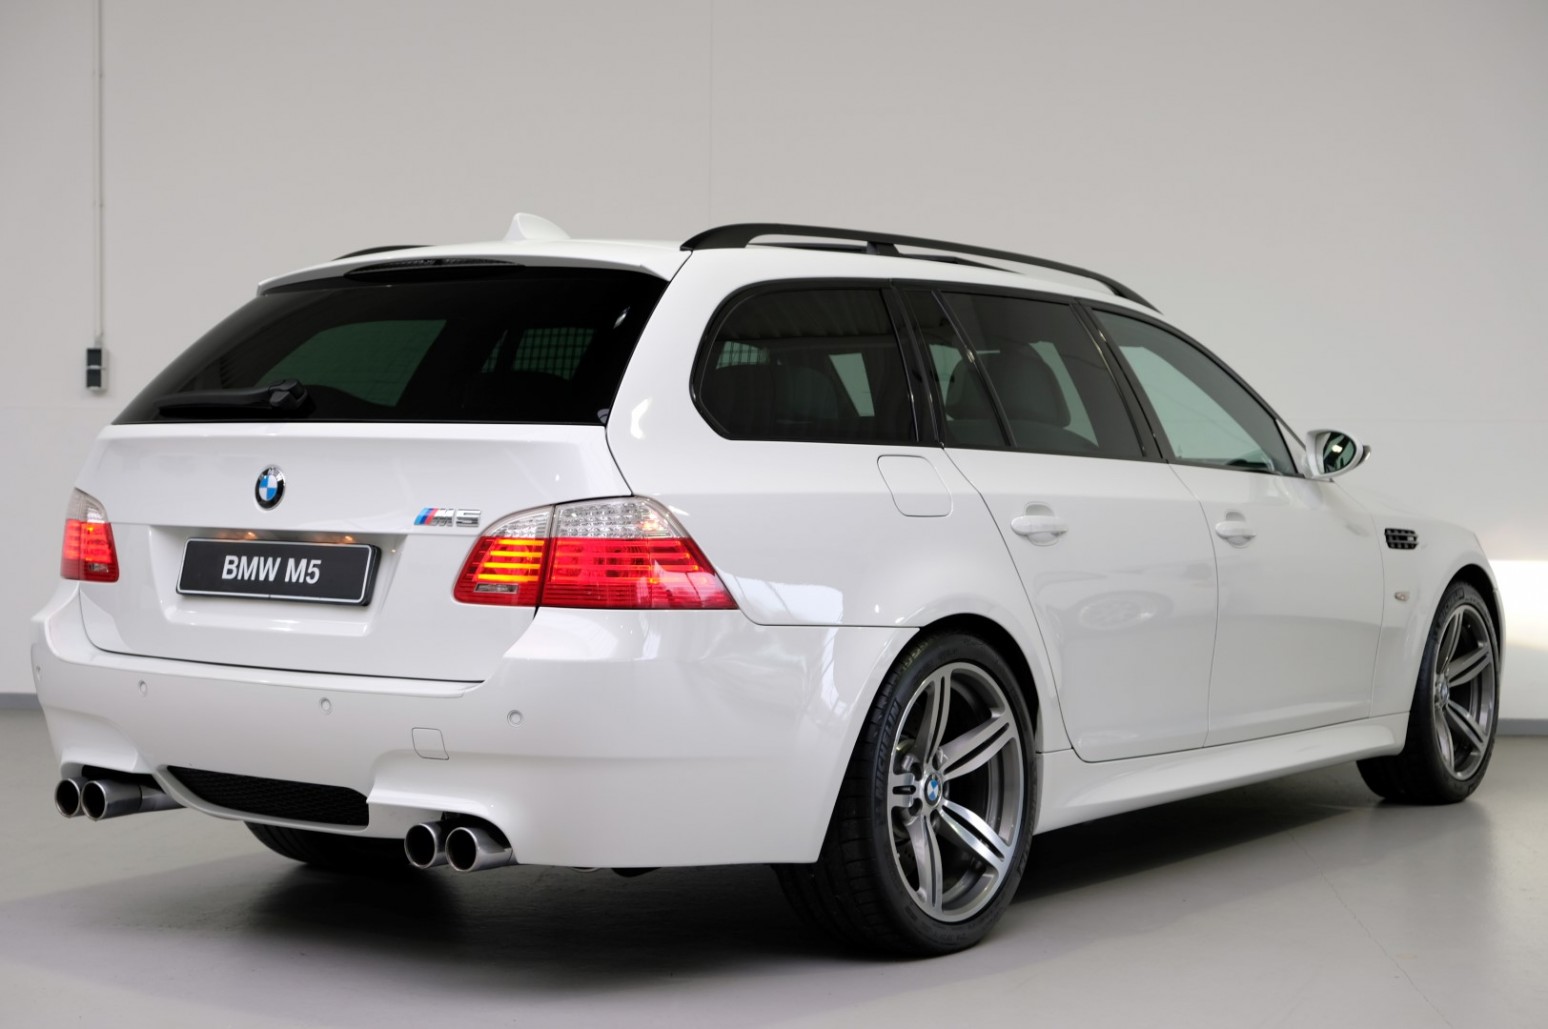 BMW M5 Touring Is For Soccer Who Dislike Fast SUVs | Carscoops